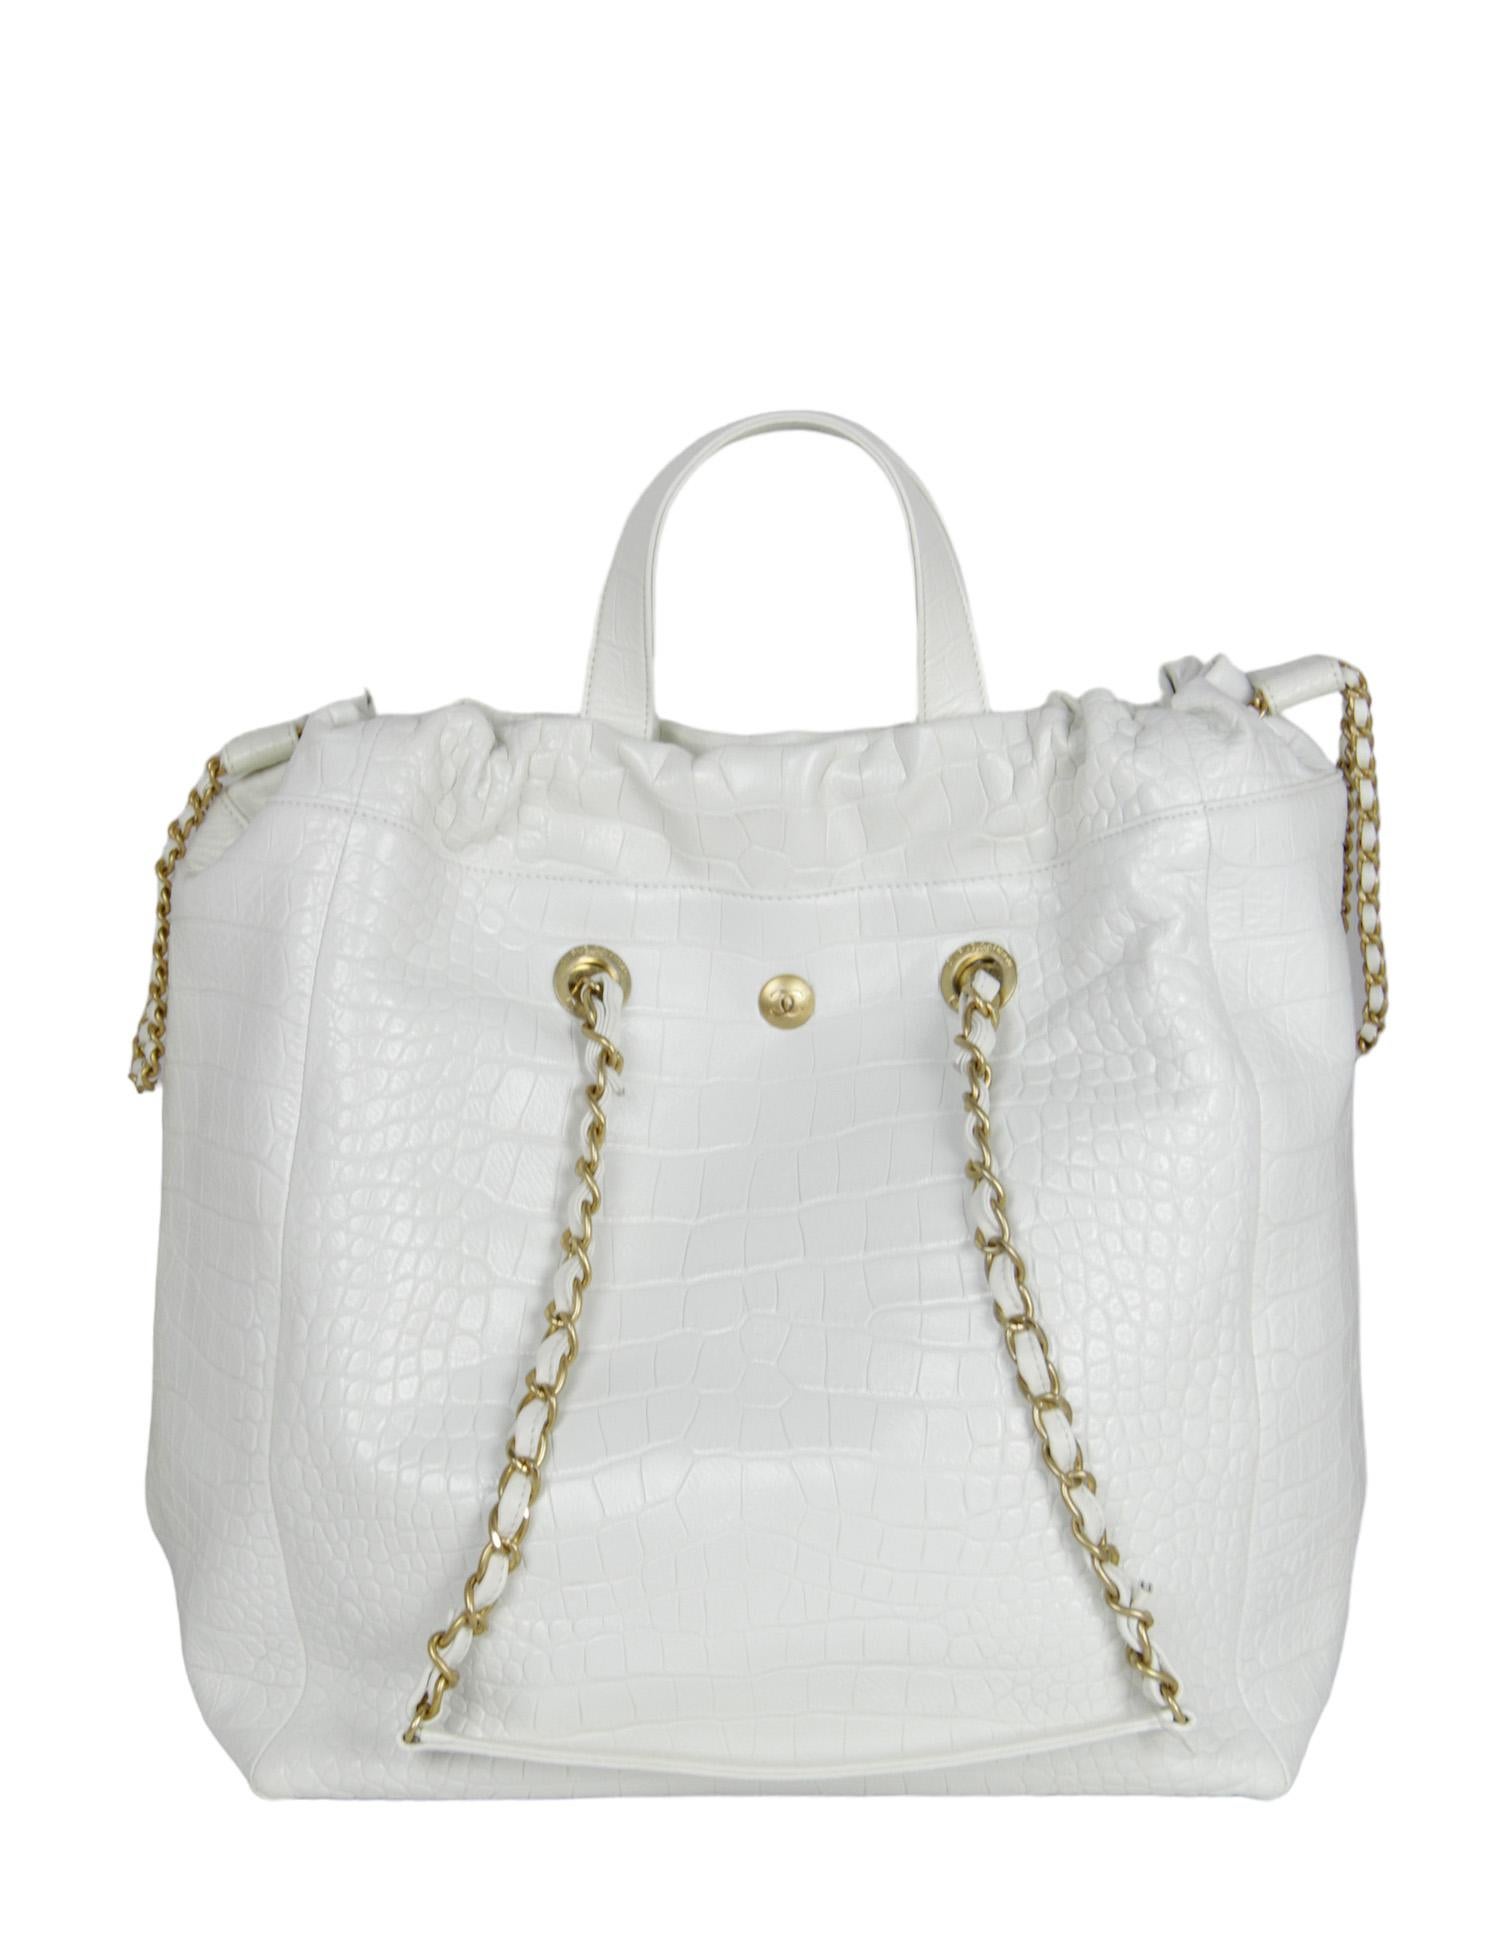 Chanel White Embossed Croc Paris-New York Large Coco Tote Bag. Features adjustable cinch at top

Made In: Italy
Year of Production: 2019
Color: White
Hardware: Goldtone
Materials: Embossed crocodile print leather
Lining: Black fine